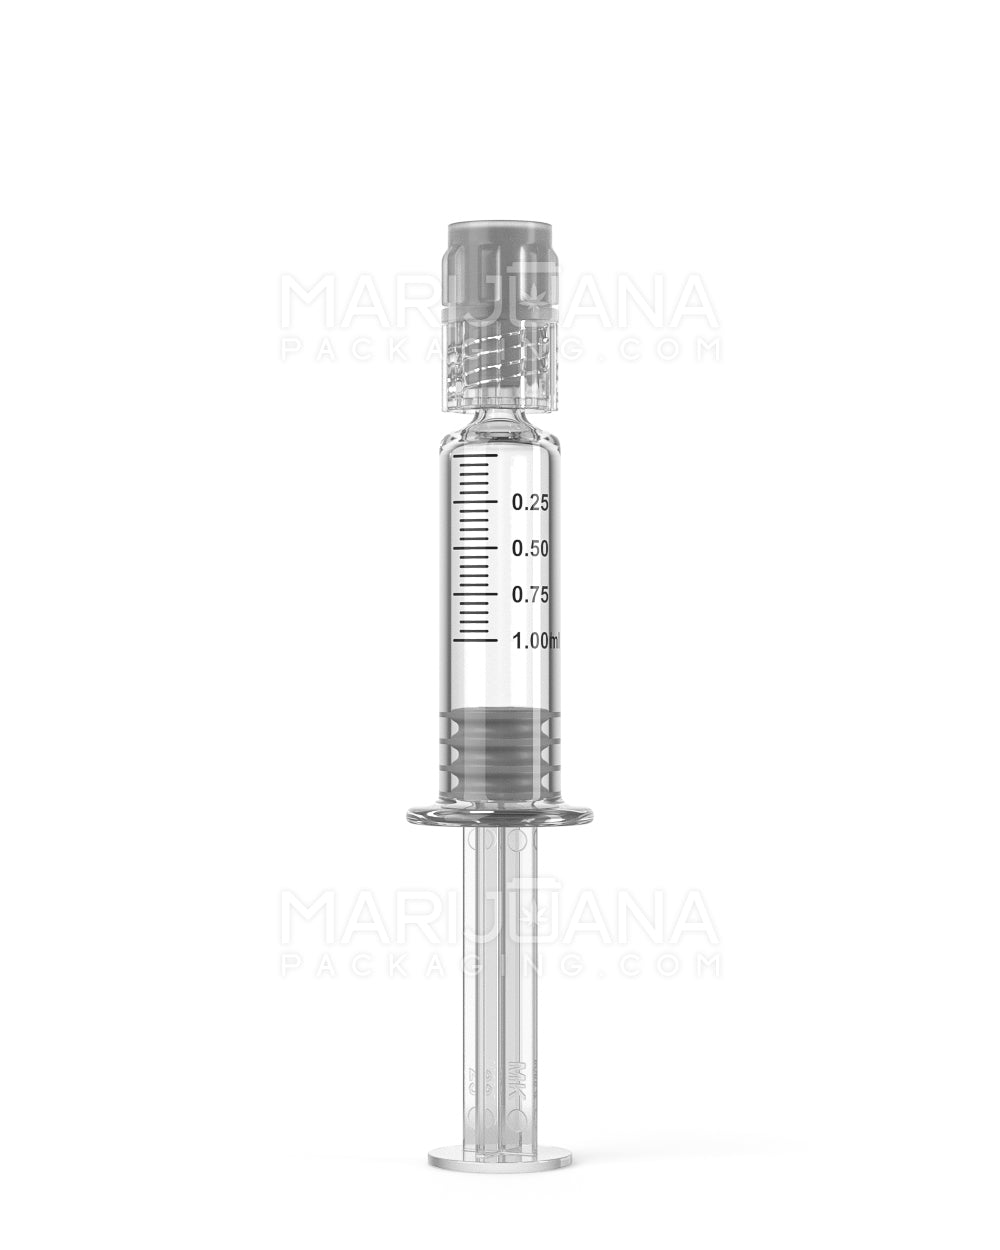 Luer Lock | Glass Dab Applicator Syringes | 1mL - 0.25mL Increments - 100 Count - 1